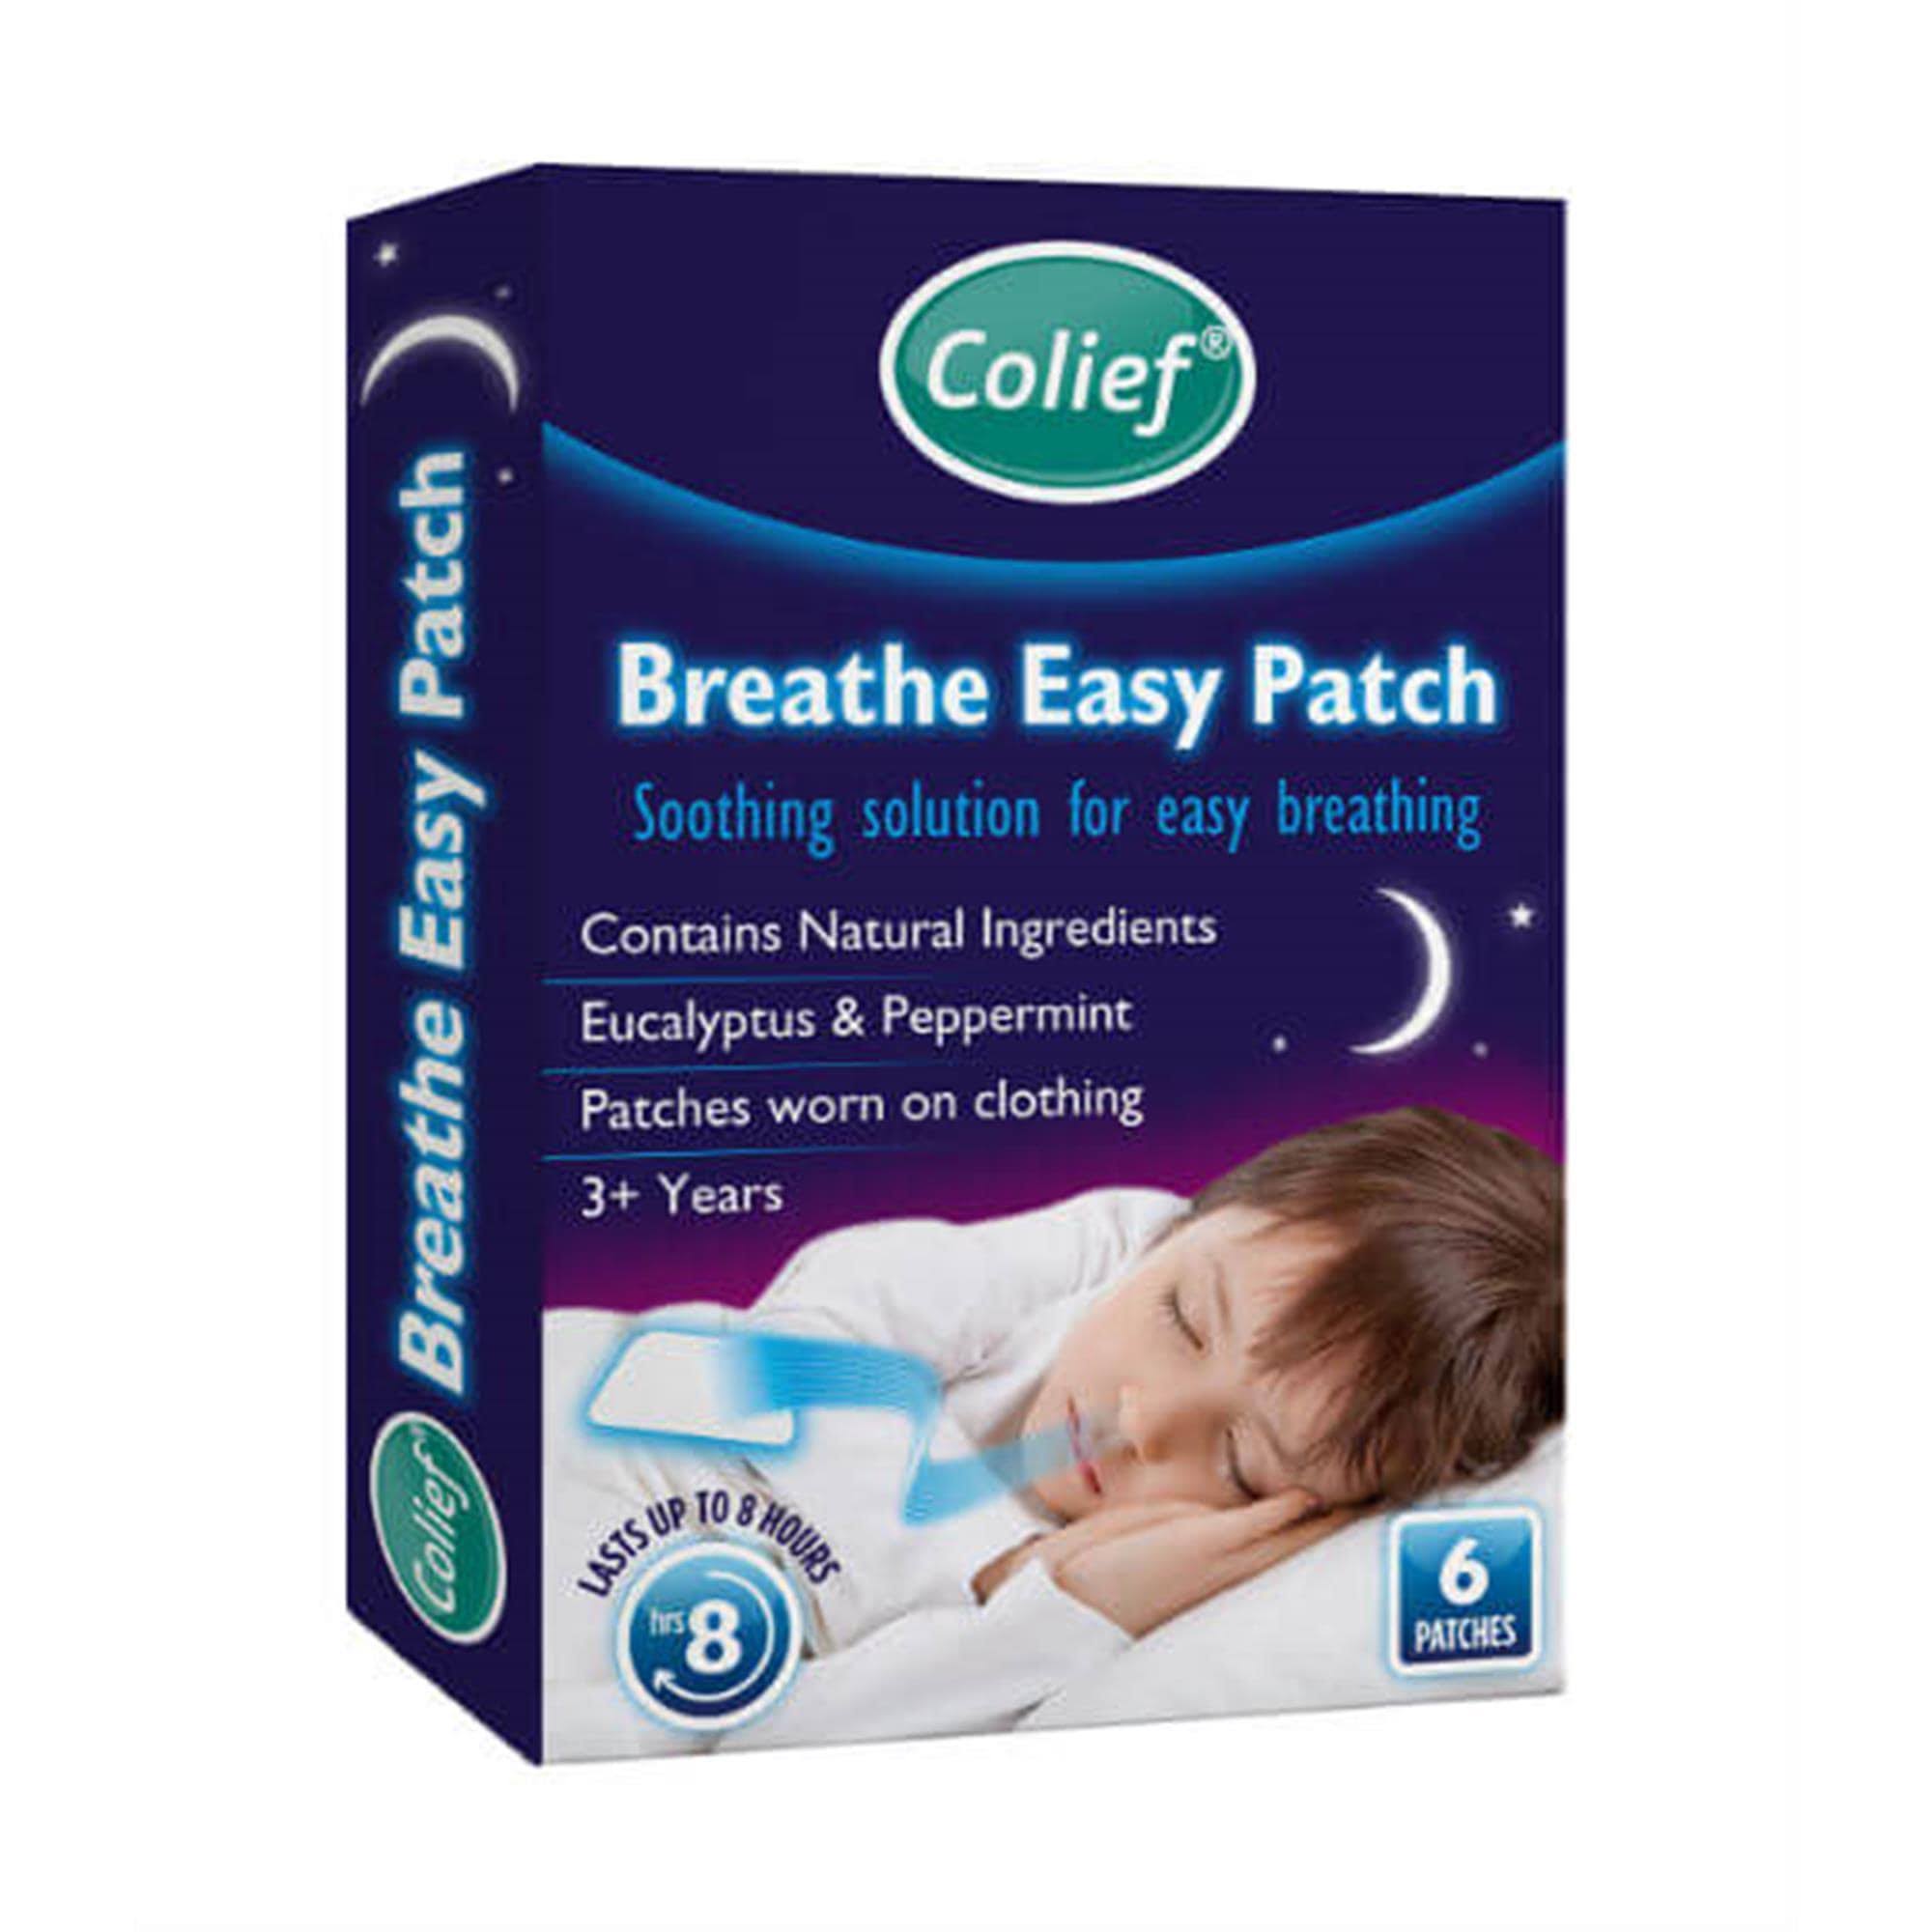 Colief Breathe Easy Patch - 6ct